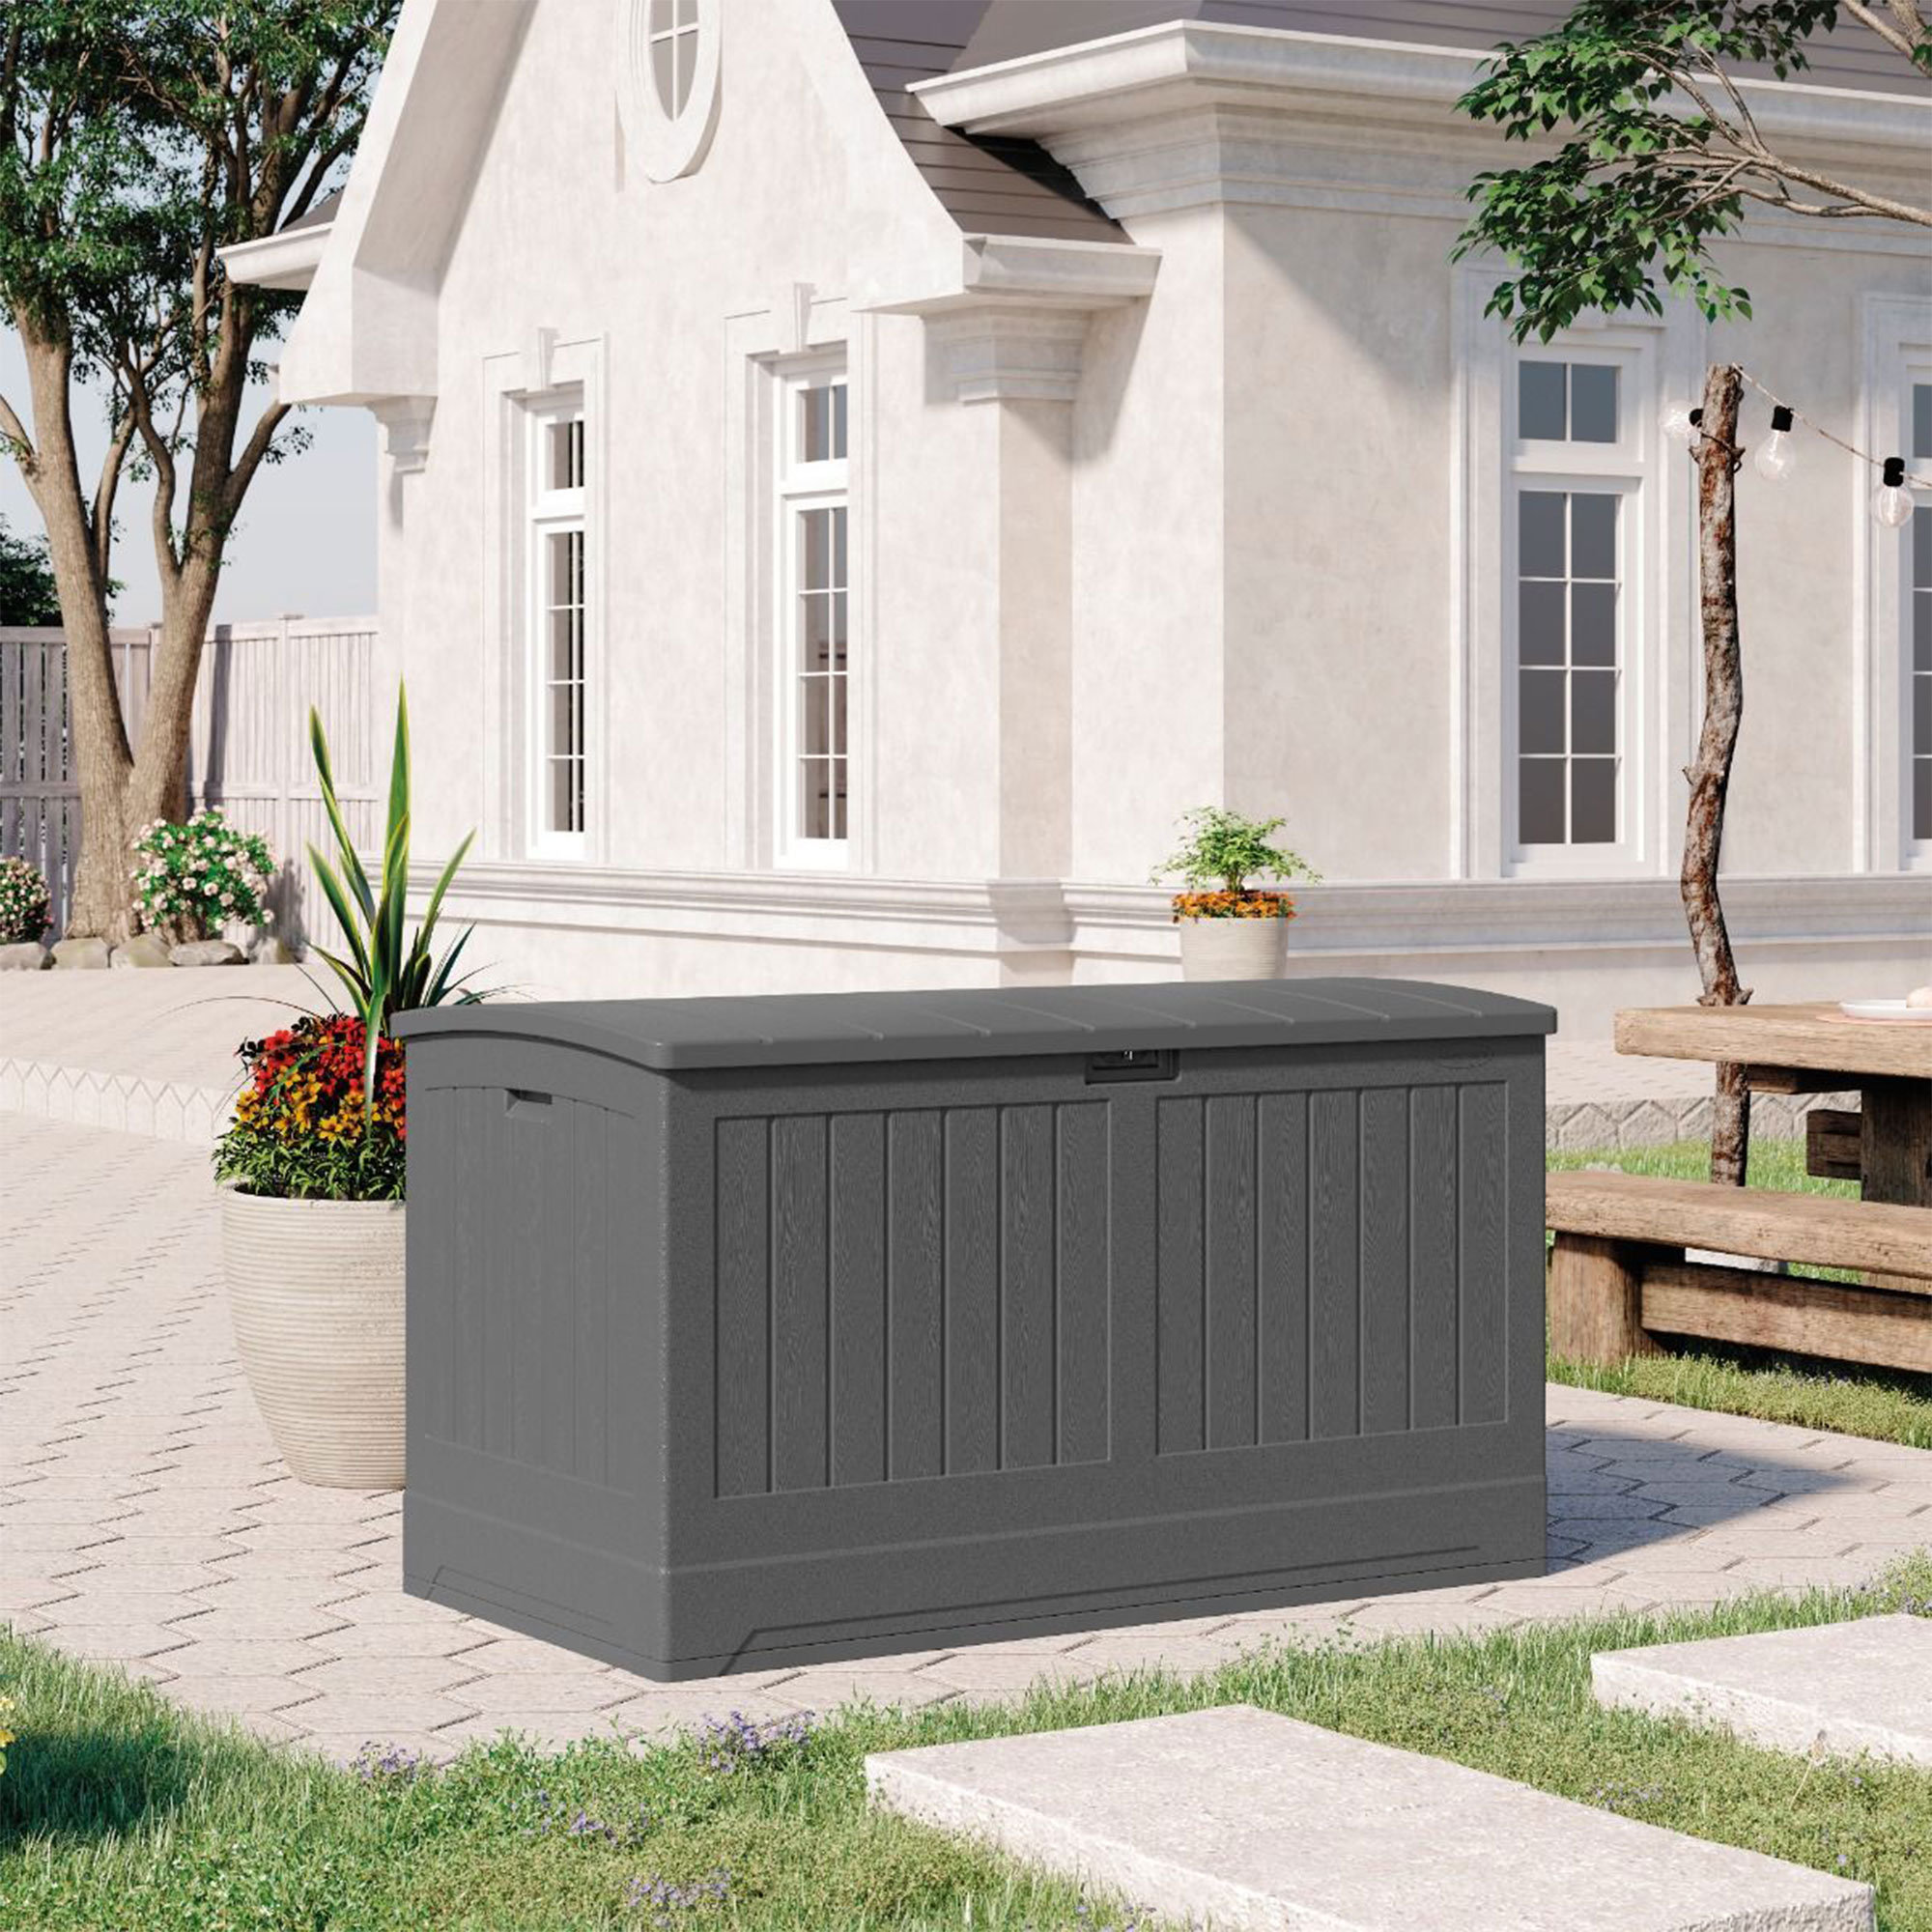  YITAHOME 100 Gallon Large Resin Deck Box Outdoor Storage with  Cushion for Patio Furniture, Outdoor Cushions, Garden Tools and Pool  Supplies-Waterproof,Lockable (Dark Grey) : Patio, Lawn & Garden